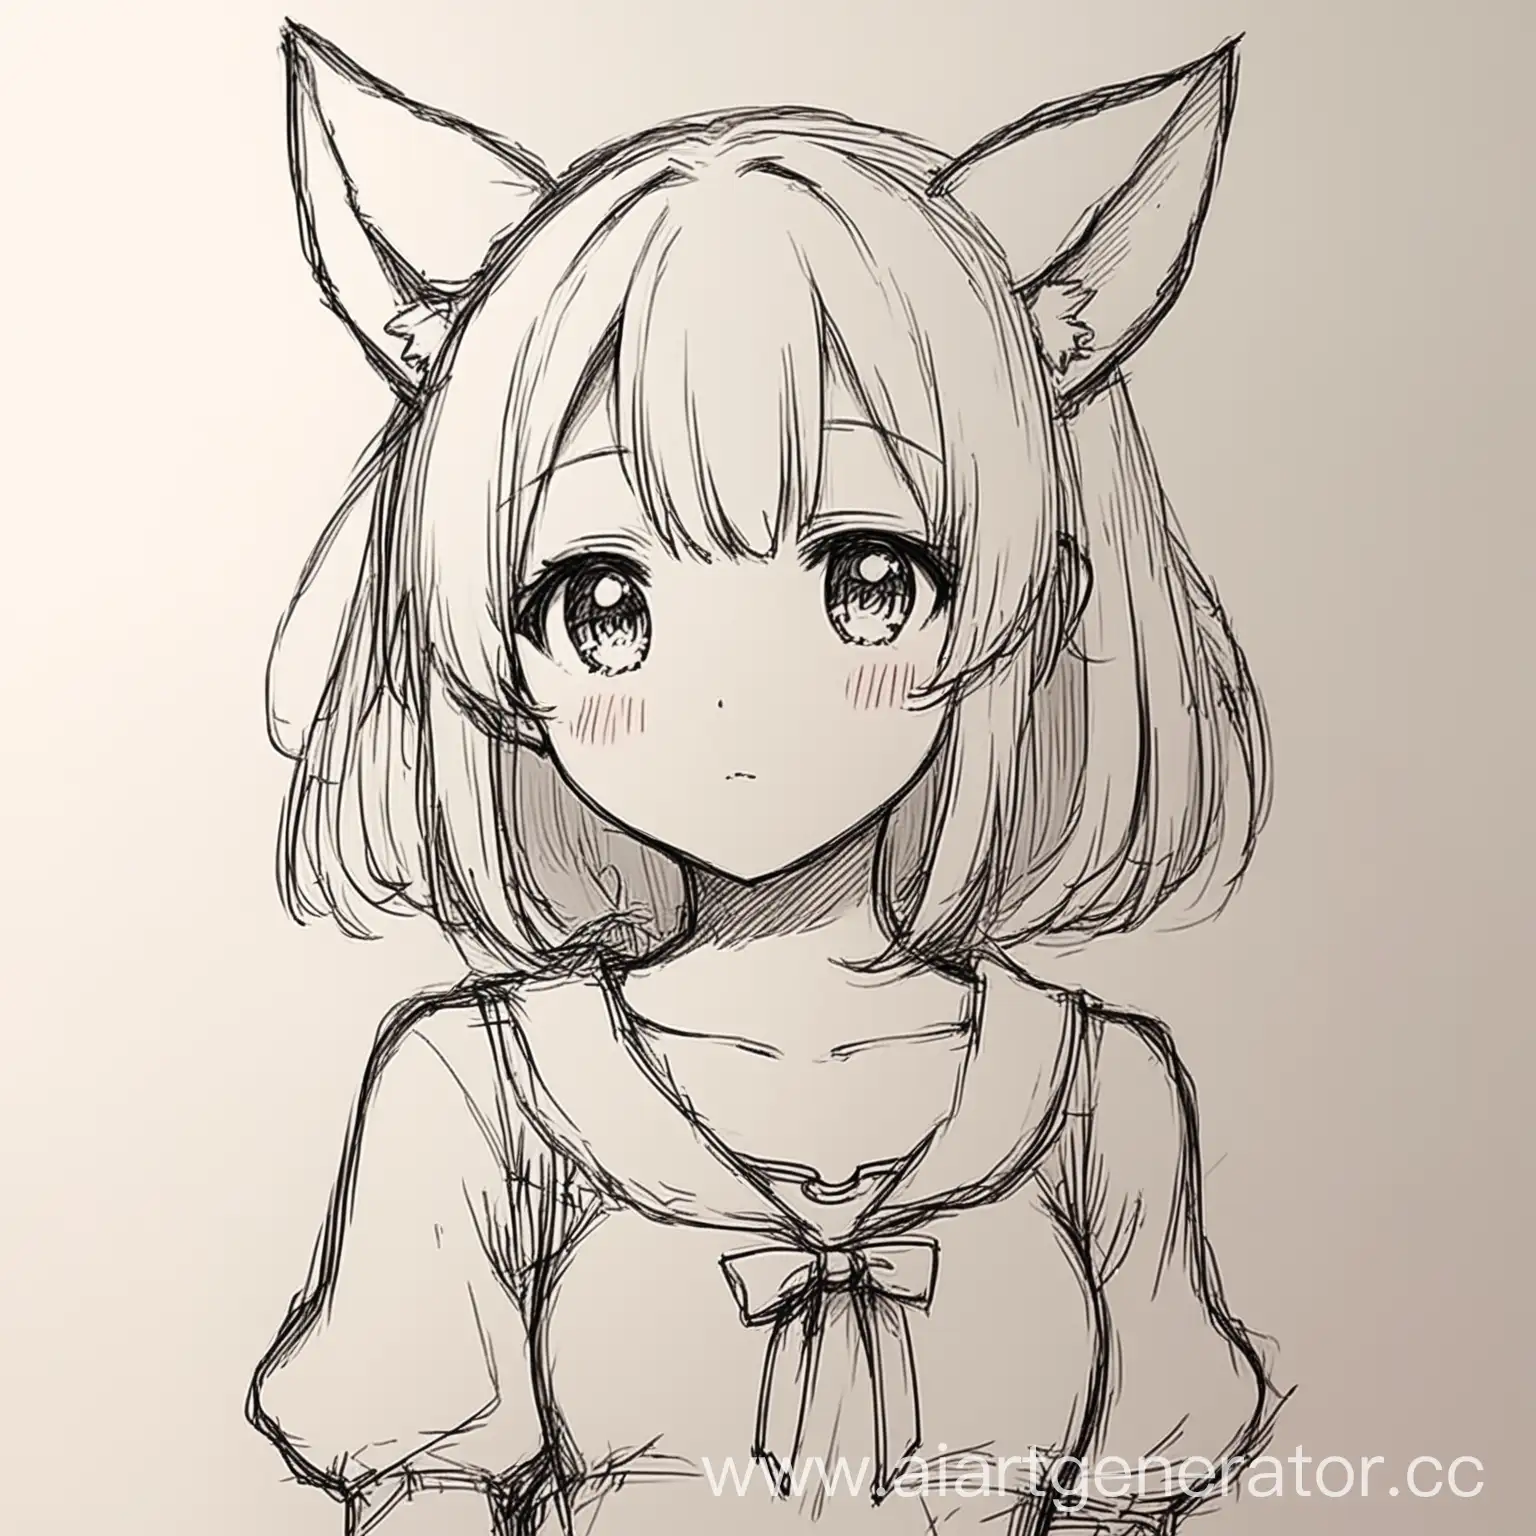 Sketch-Art-of-a-Cute-Anime-Girl-with-Ears